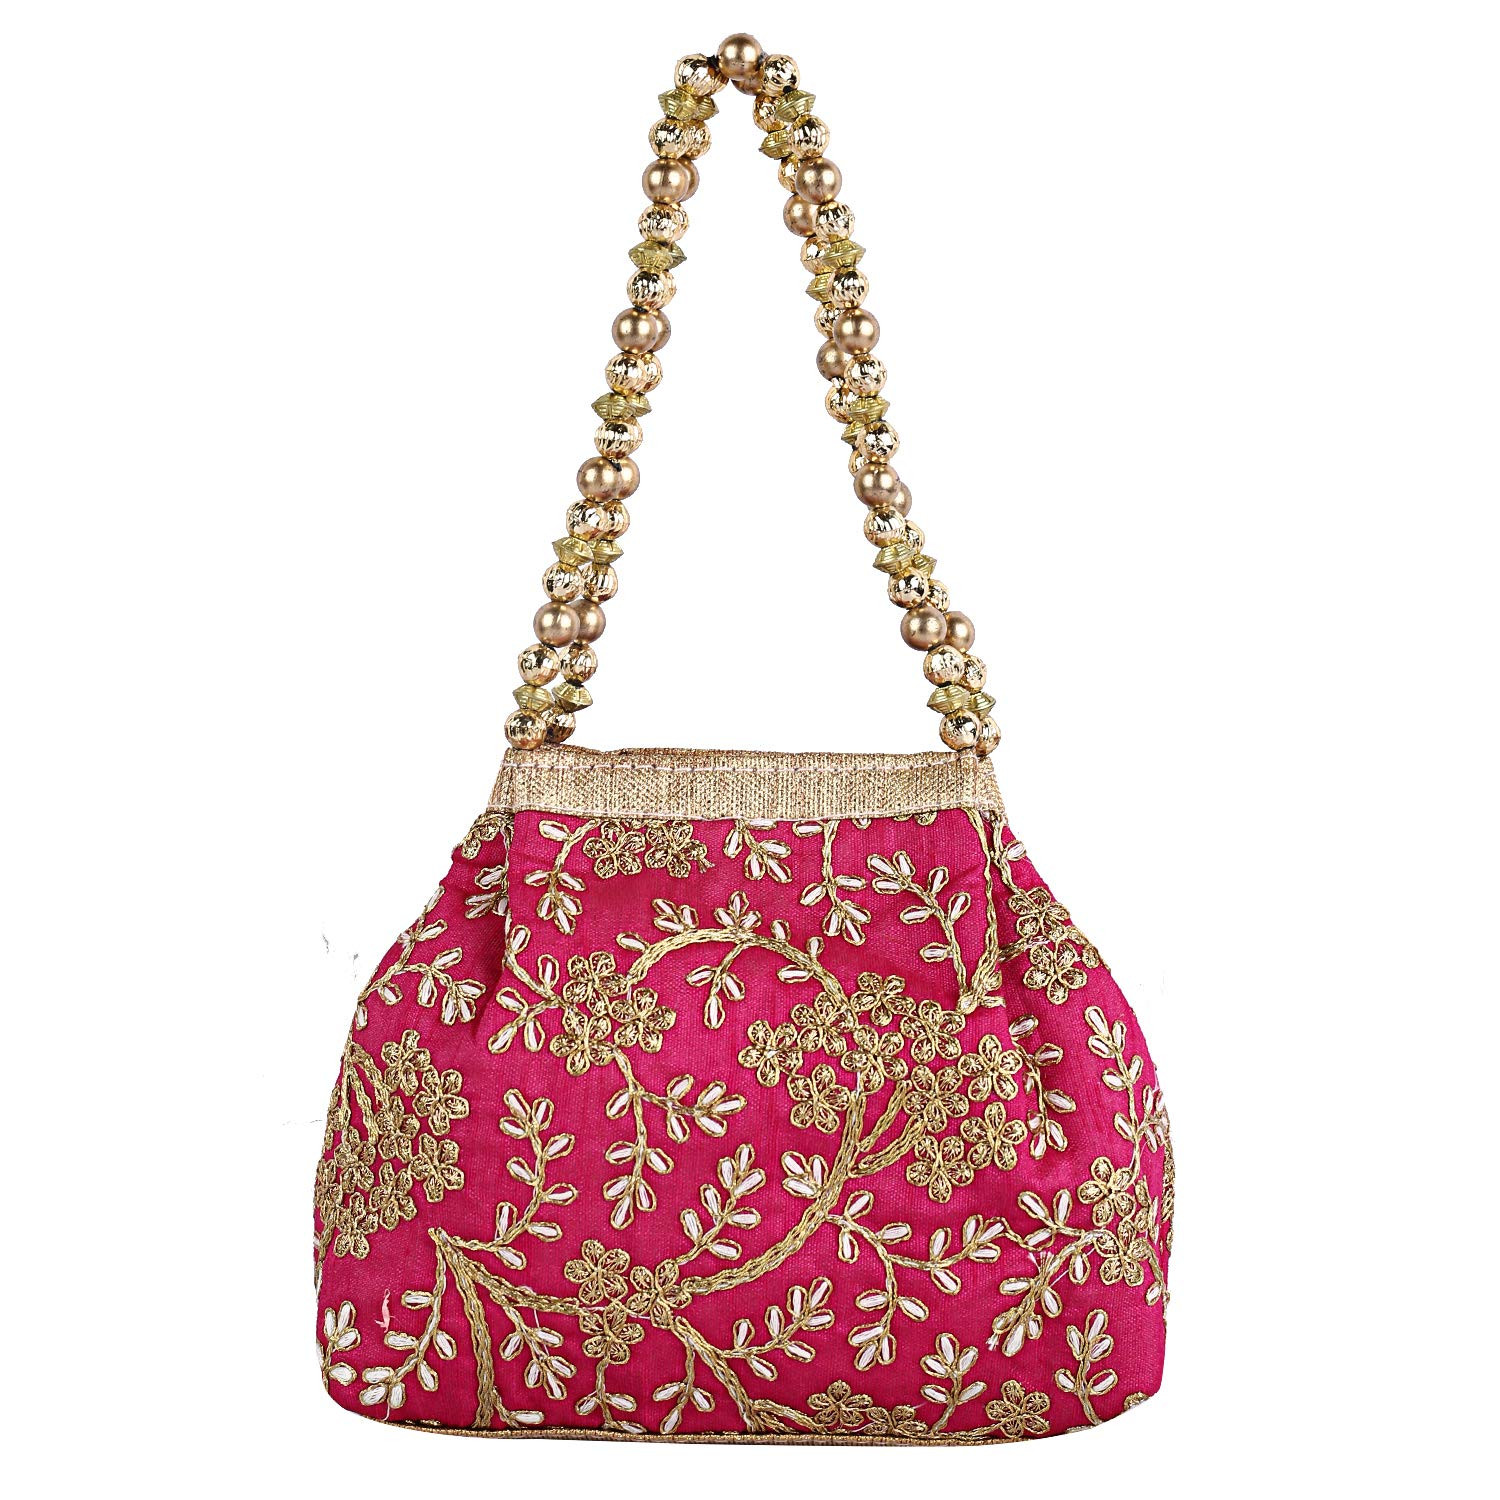 Kuber Industries Attractive Embroidery Polyester Hand Purse & Artificial Pearls Handle With 3 Magnetic Lock for Woman,Girls (Pink)